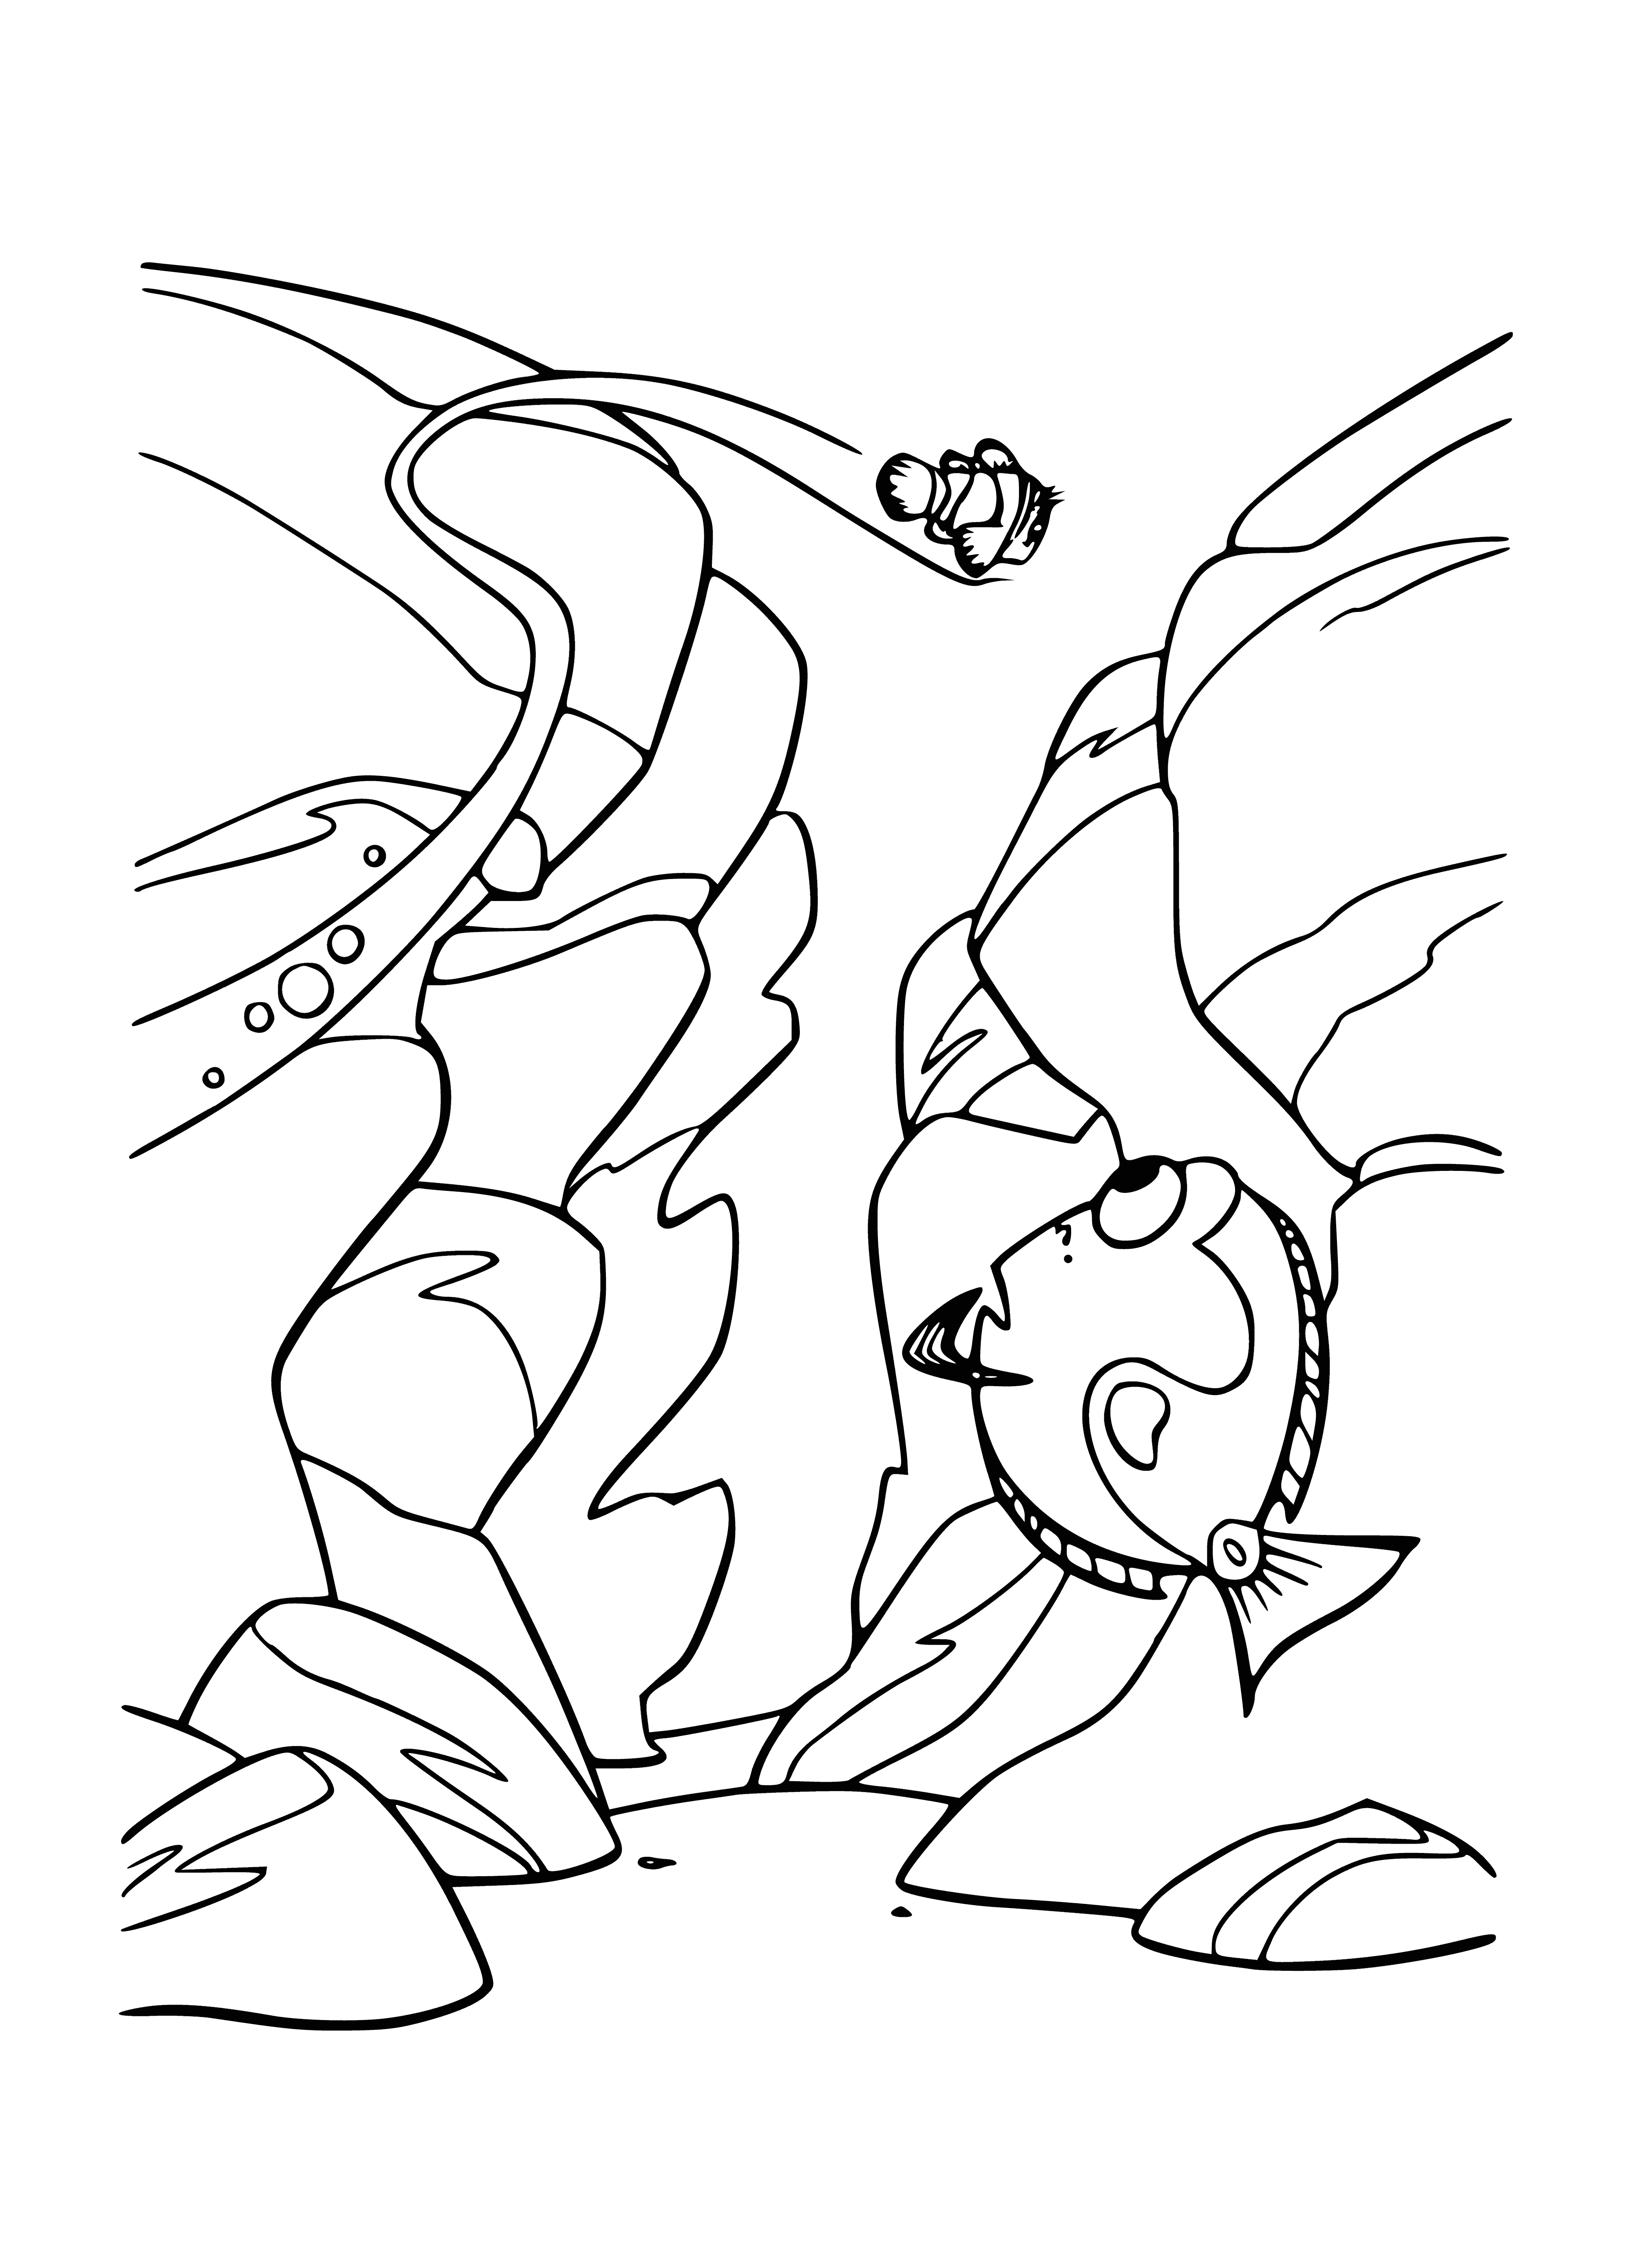 coloring page: Small fish, yellow-orange with long thin body &tail, swims towards left of deep blue ocean with white clouds in Finding Nemo - Gorge.